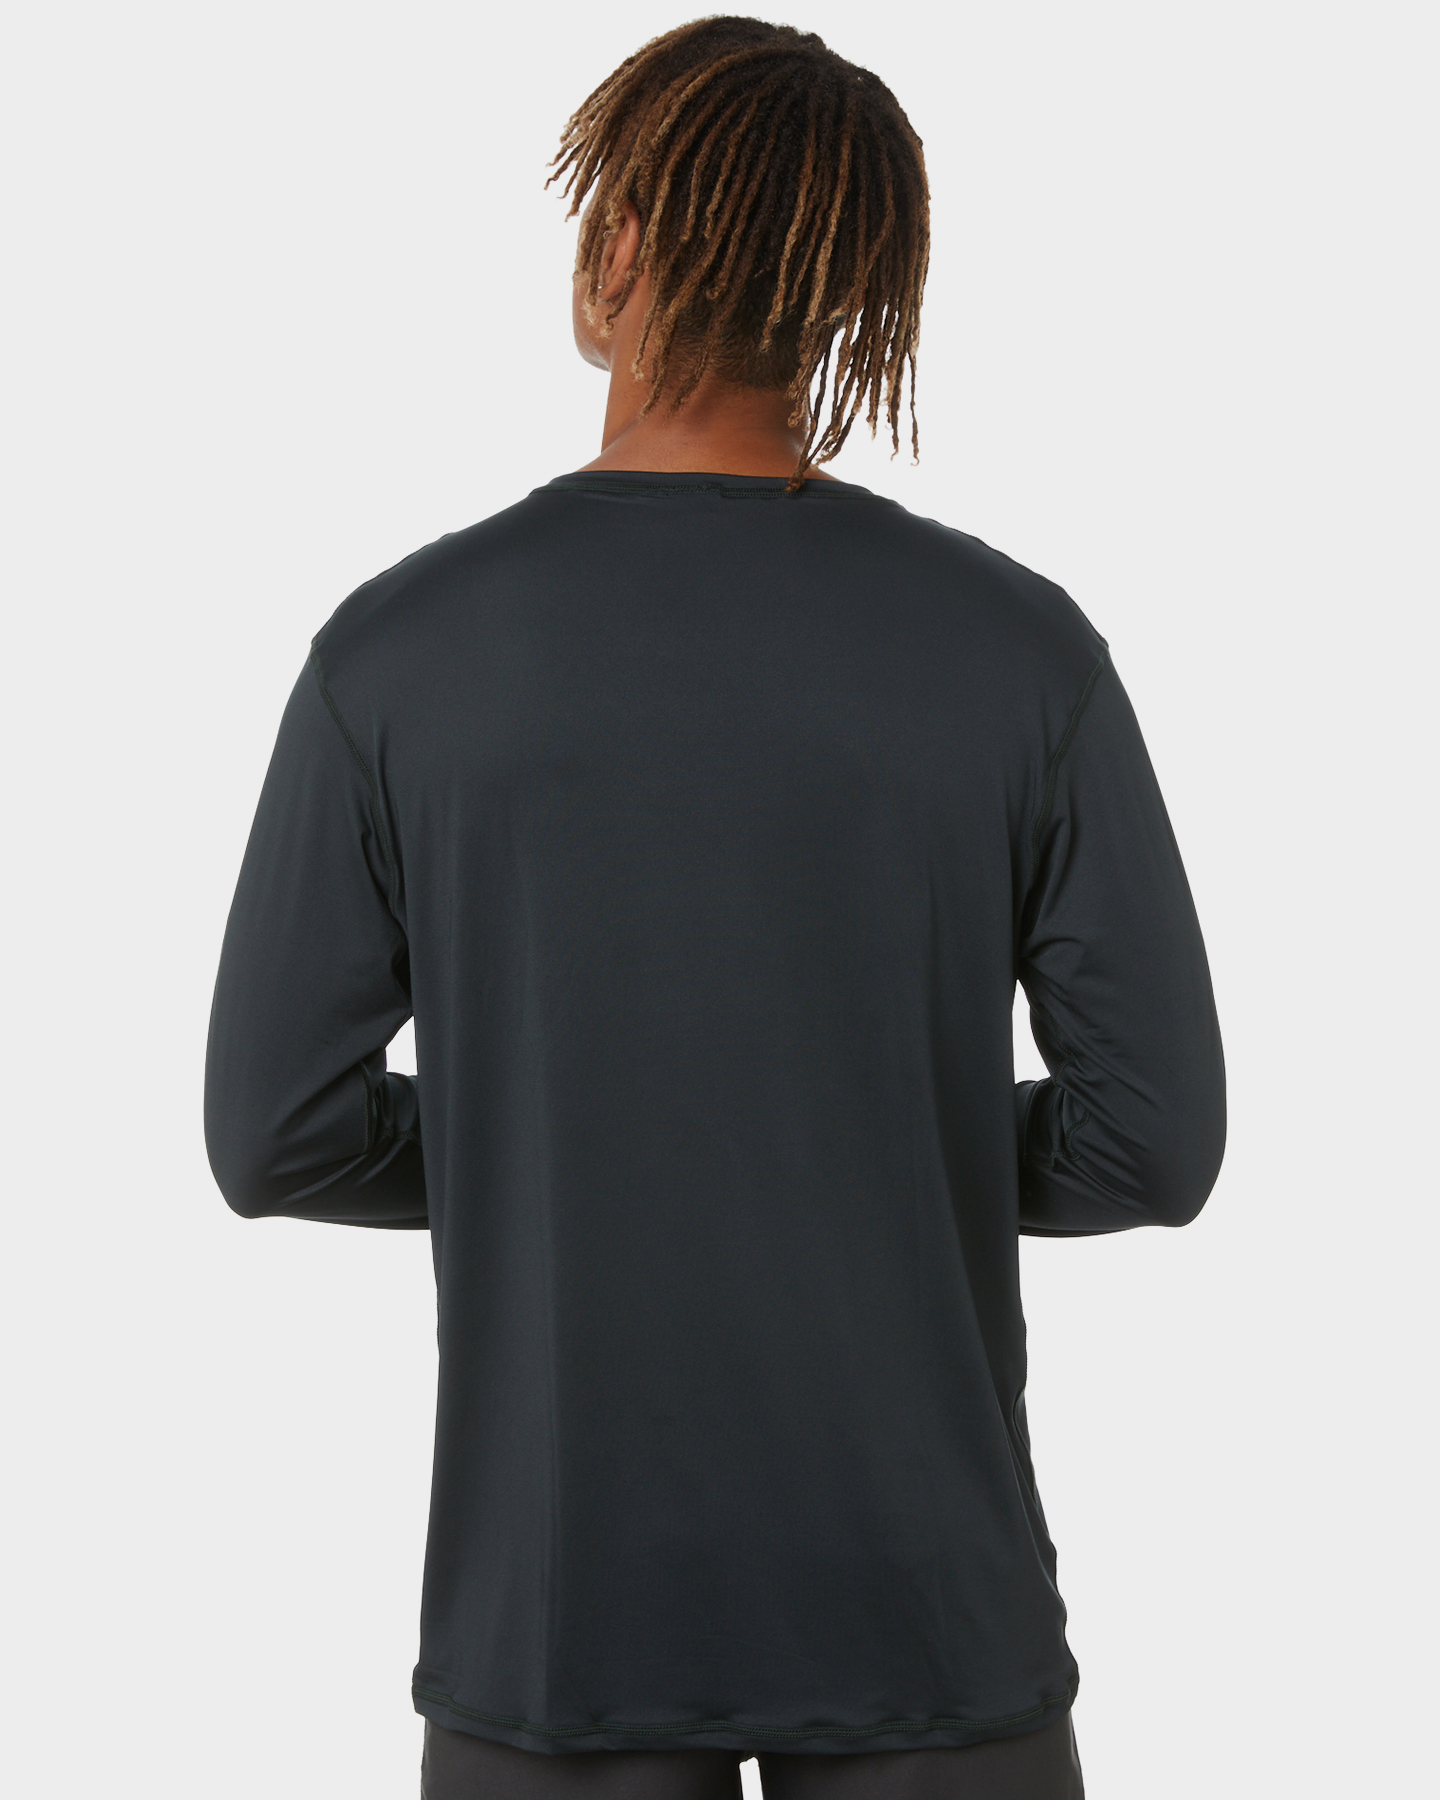 Ocean And Earth Ls Surf Shirt - Graphite | SurfStitch